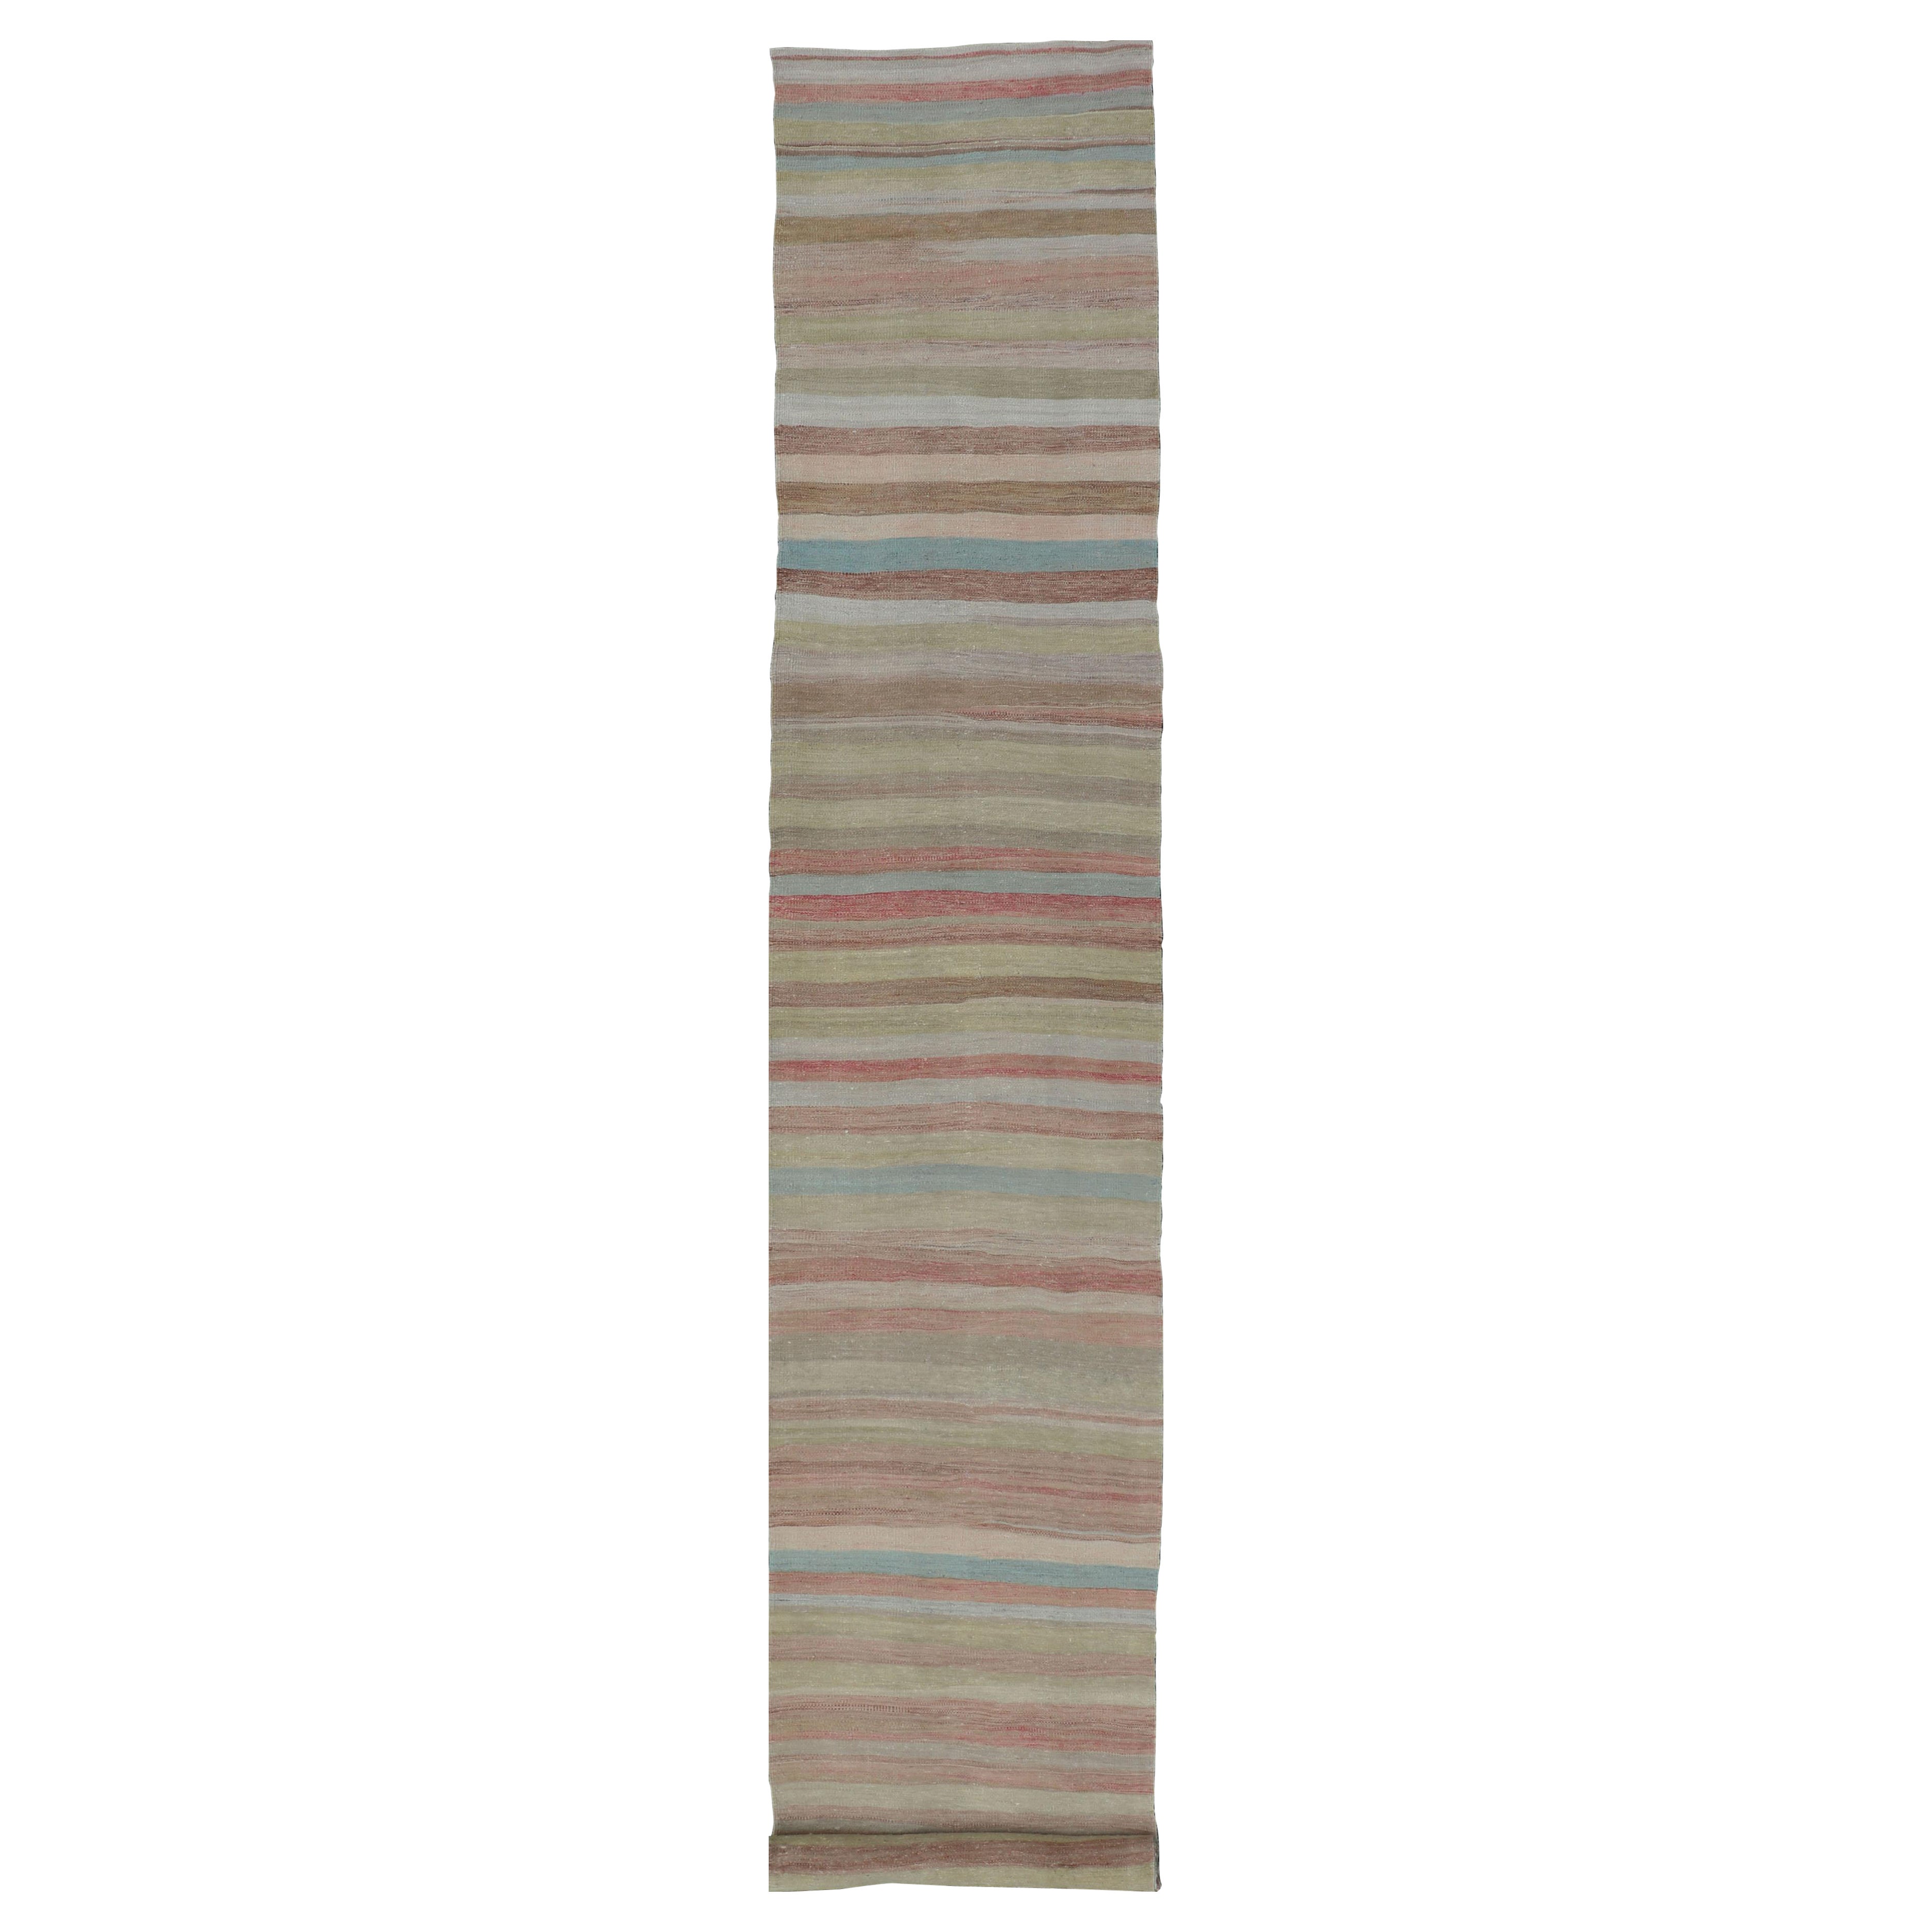 Very Long Vintage Turkish Kilim Runner with Stripe Design in Soft Colors 